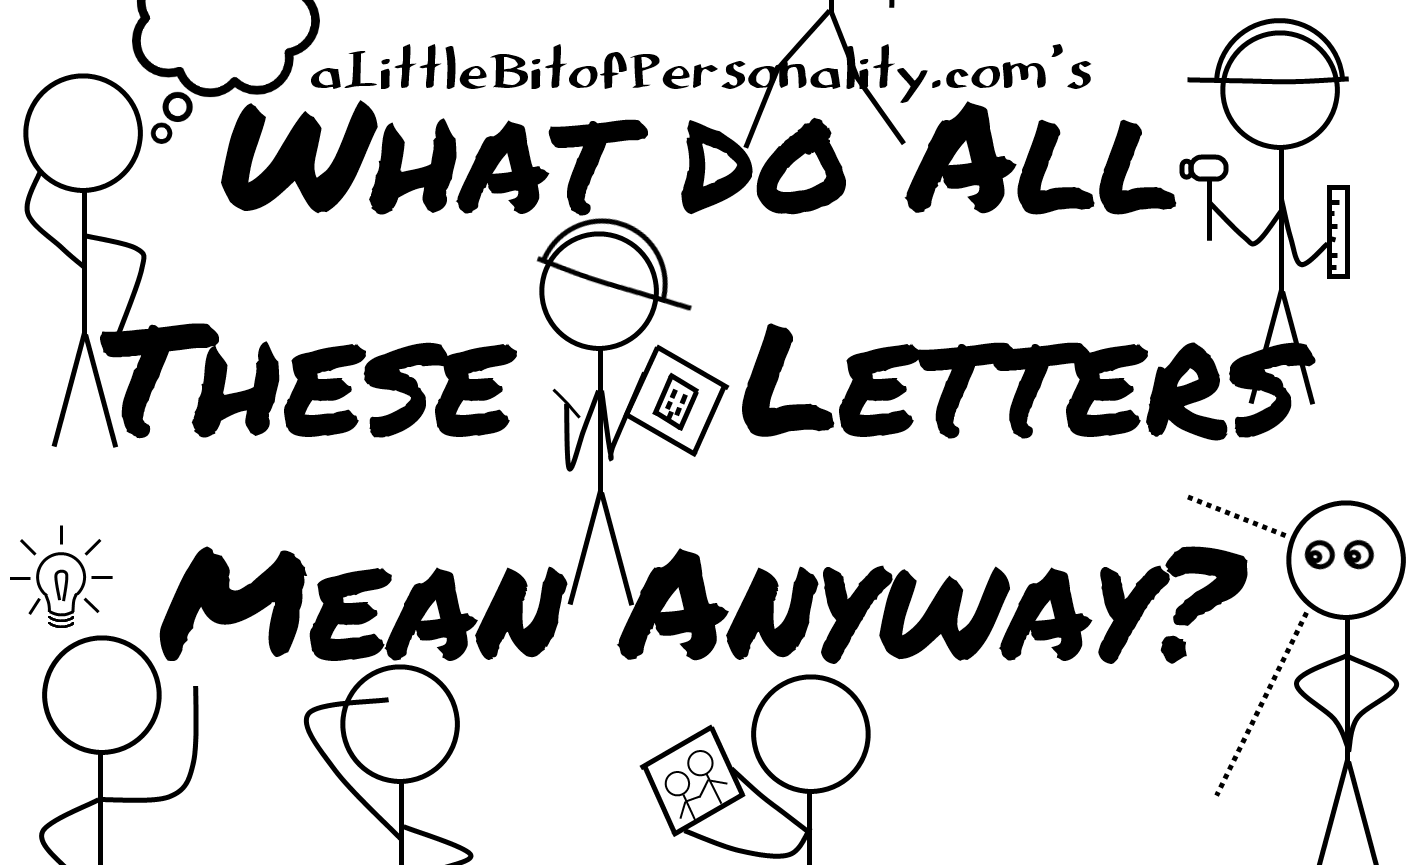 What Do All These Letters Mean Anyway? - A Little Bit of Personality